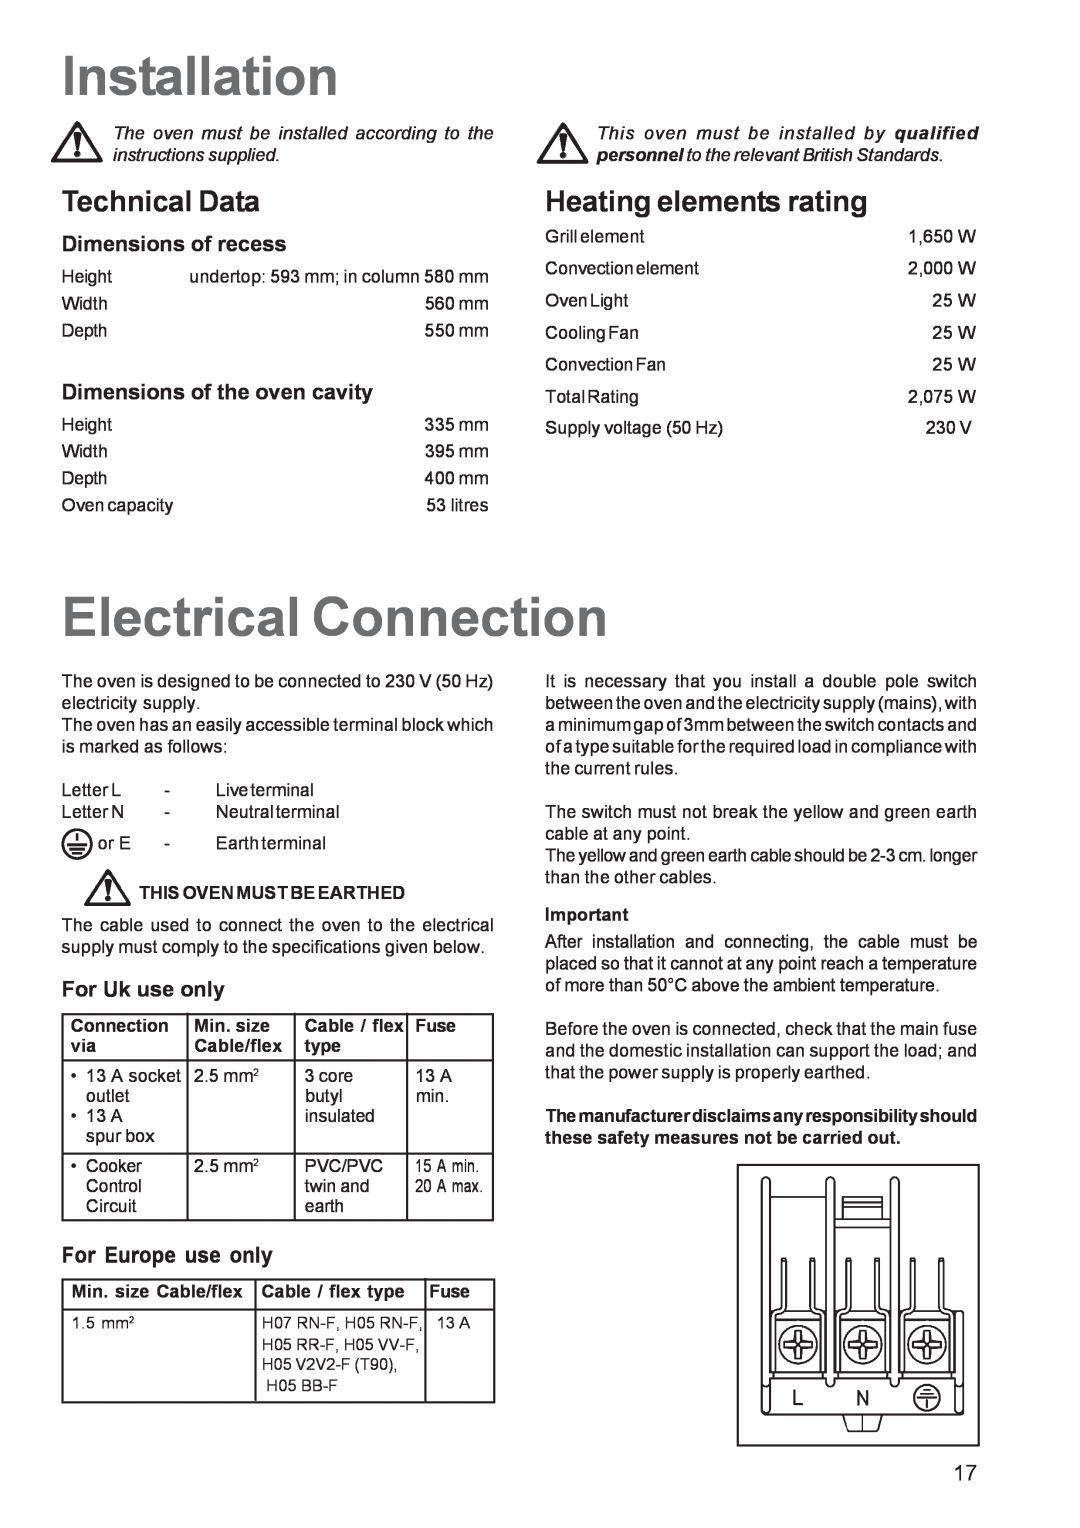 Electrolux EOB 5700 Installation, Electrical Connection, Technical Data, Dimensions of recess, For Uk use only, Min. size 